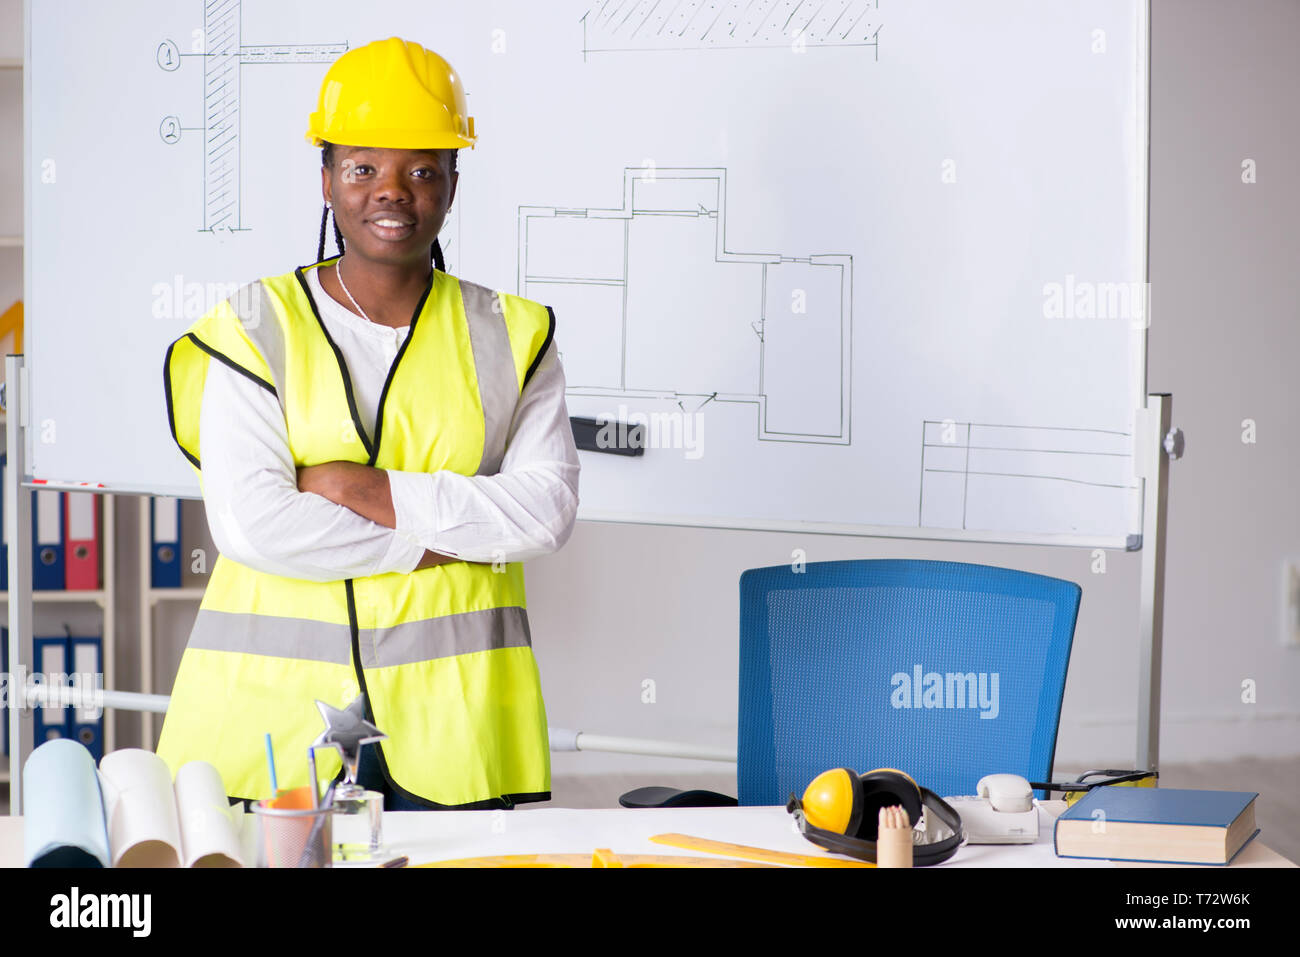 Young black architect working on project Stock Photo